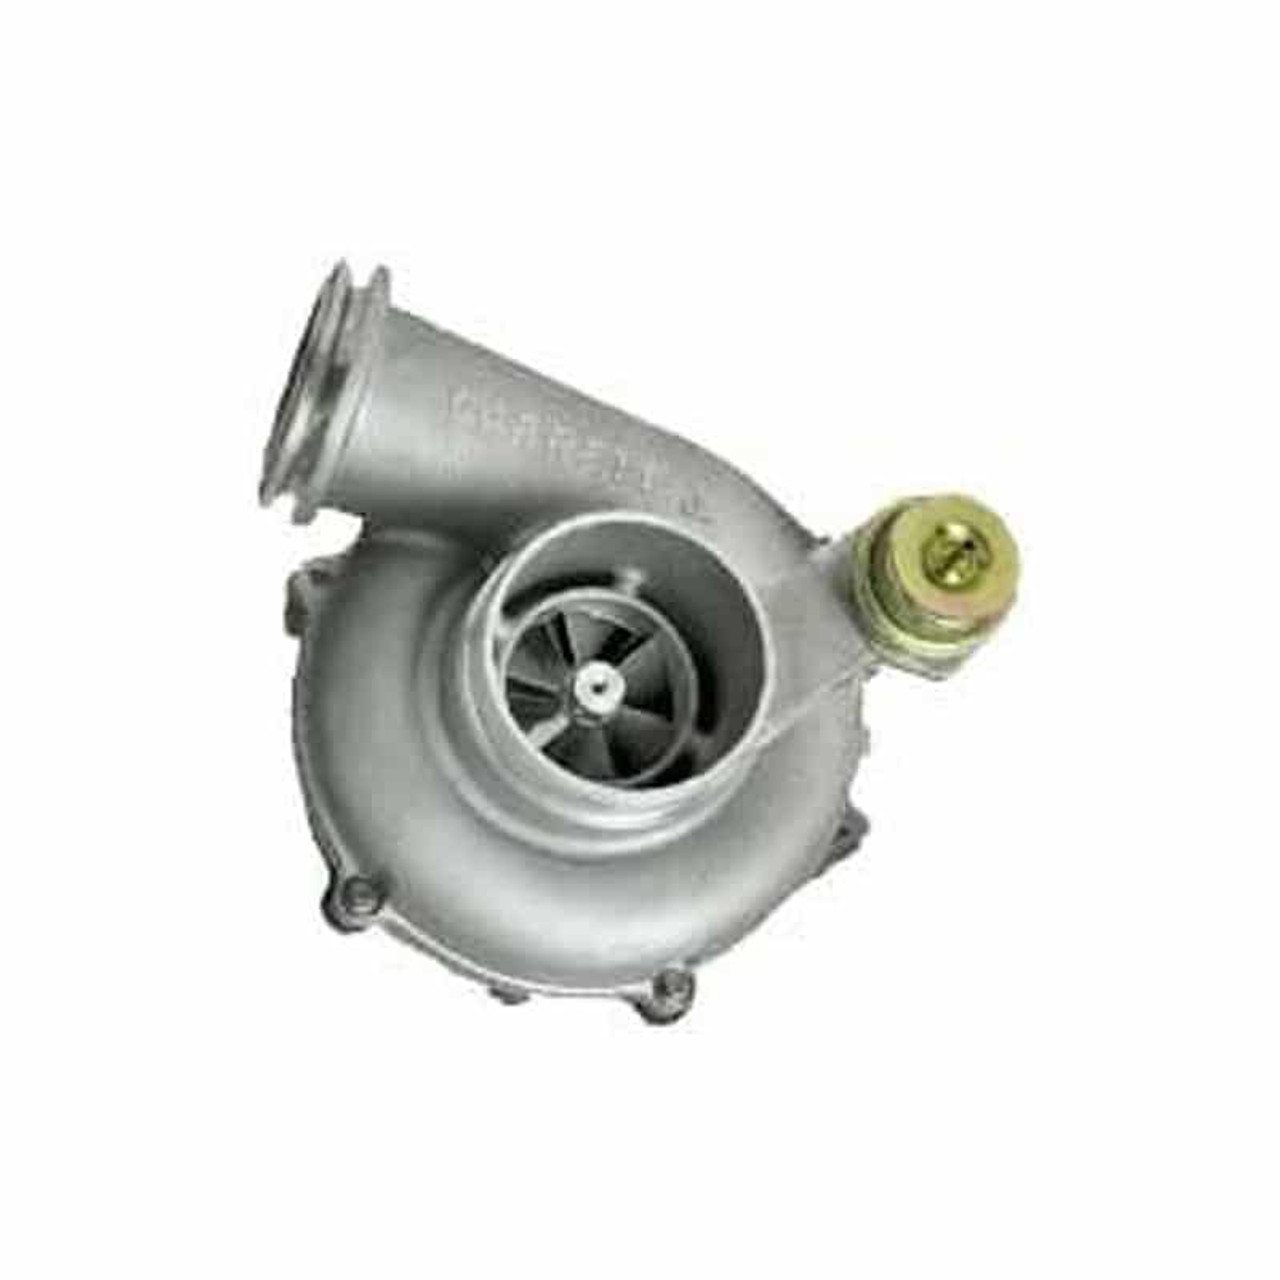 Industrial Injections Reman Stock Turbo for 1995.5 to 2003 Ford 7.3L Powerstroke (706447-0003SE) Main View